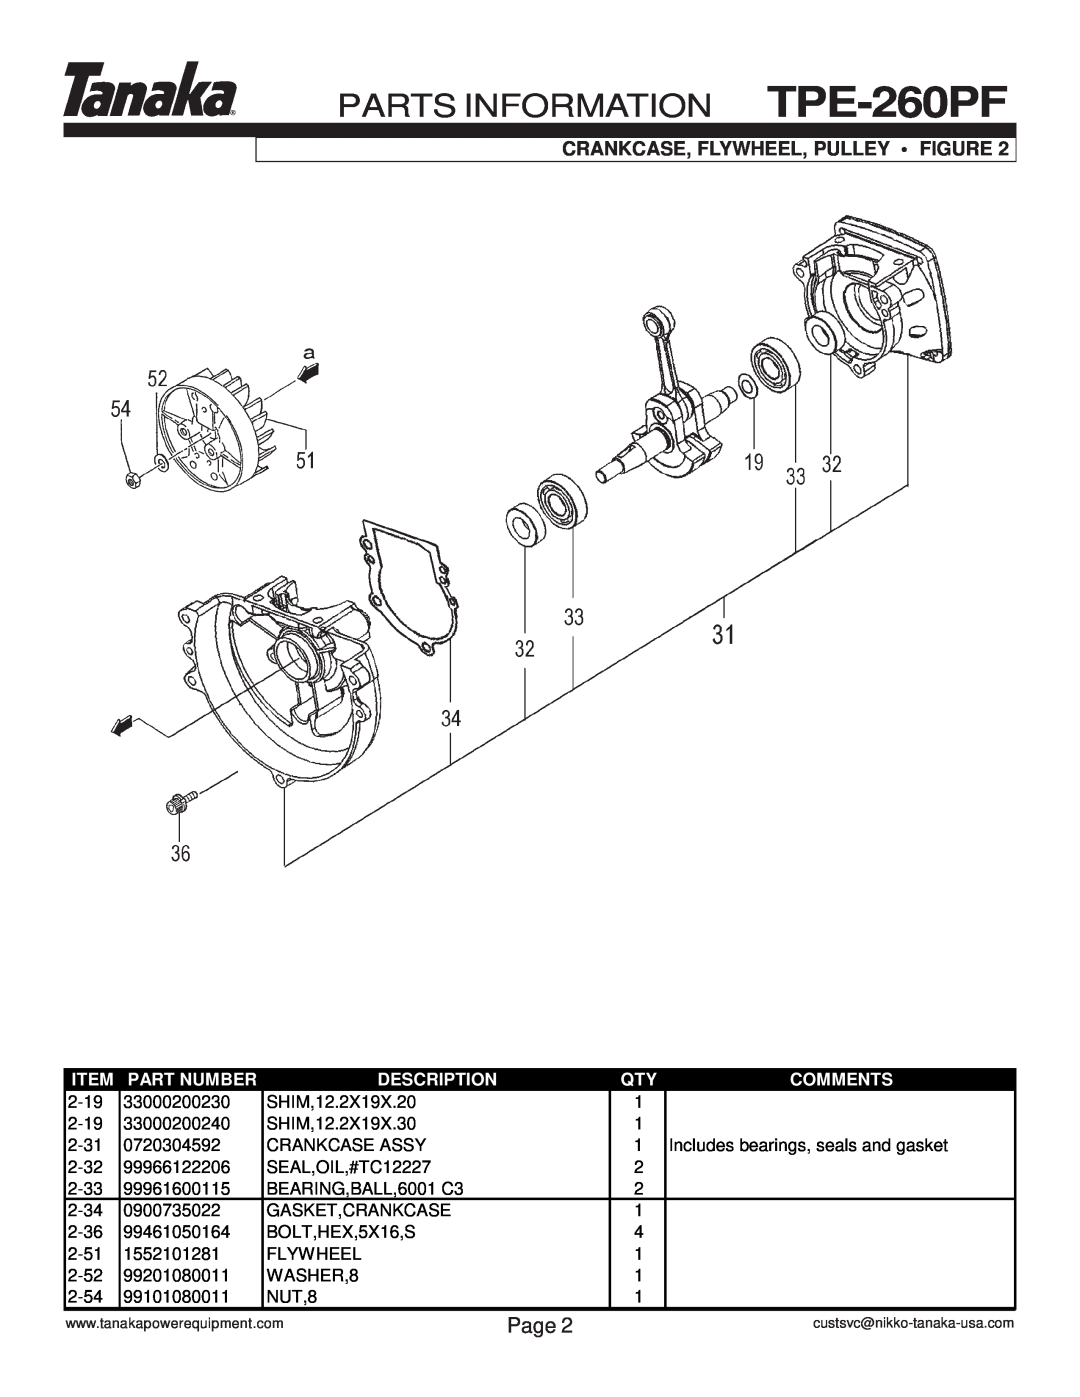 Tanaka manual PARTS INFORMATION TPE-260PF, Crankcase, Flywheel, Pulley Figure, Page, Part Number, Description, Comments 